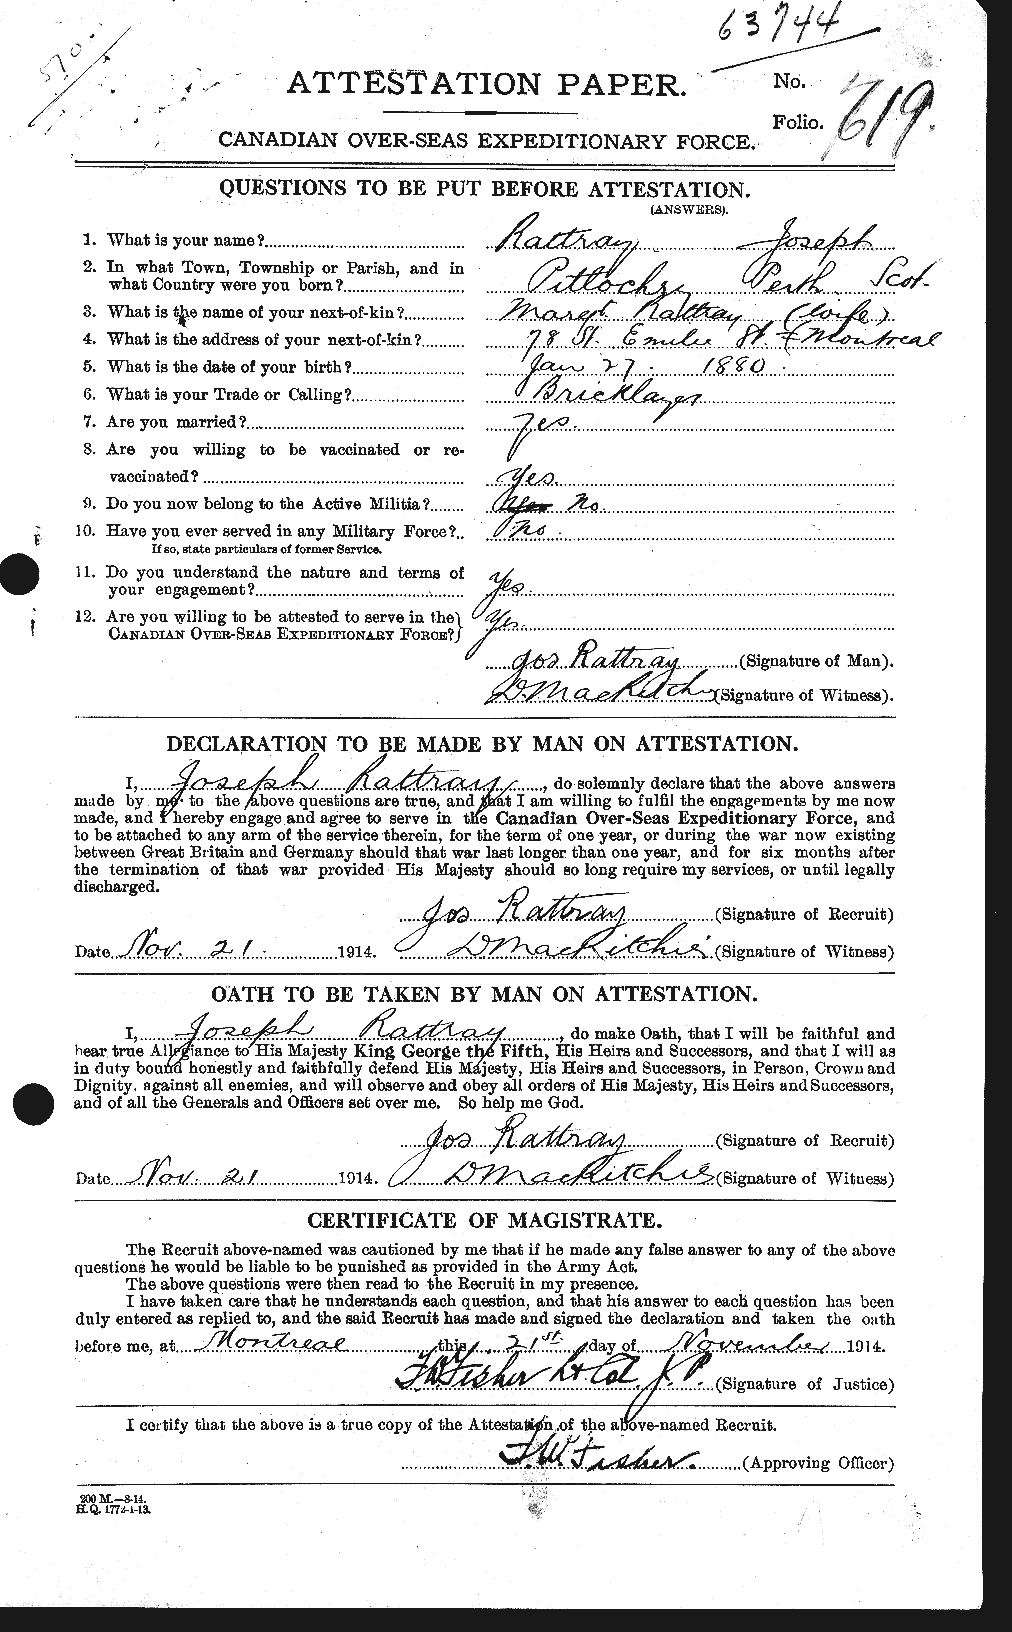 Personnel Records of the First World War - CEF 595703a